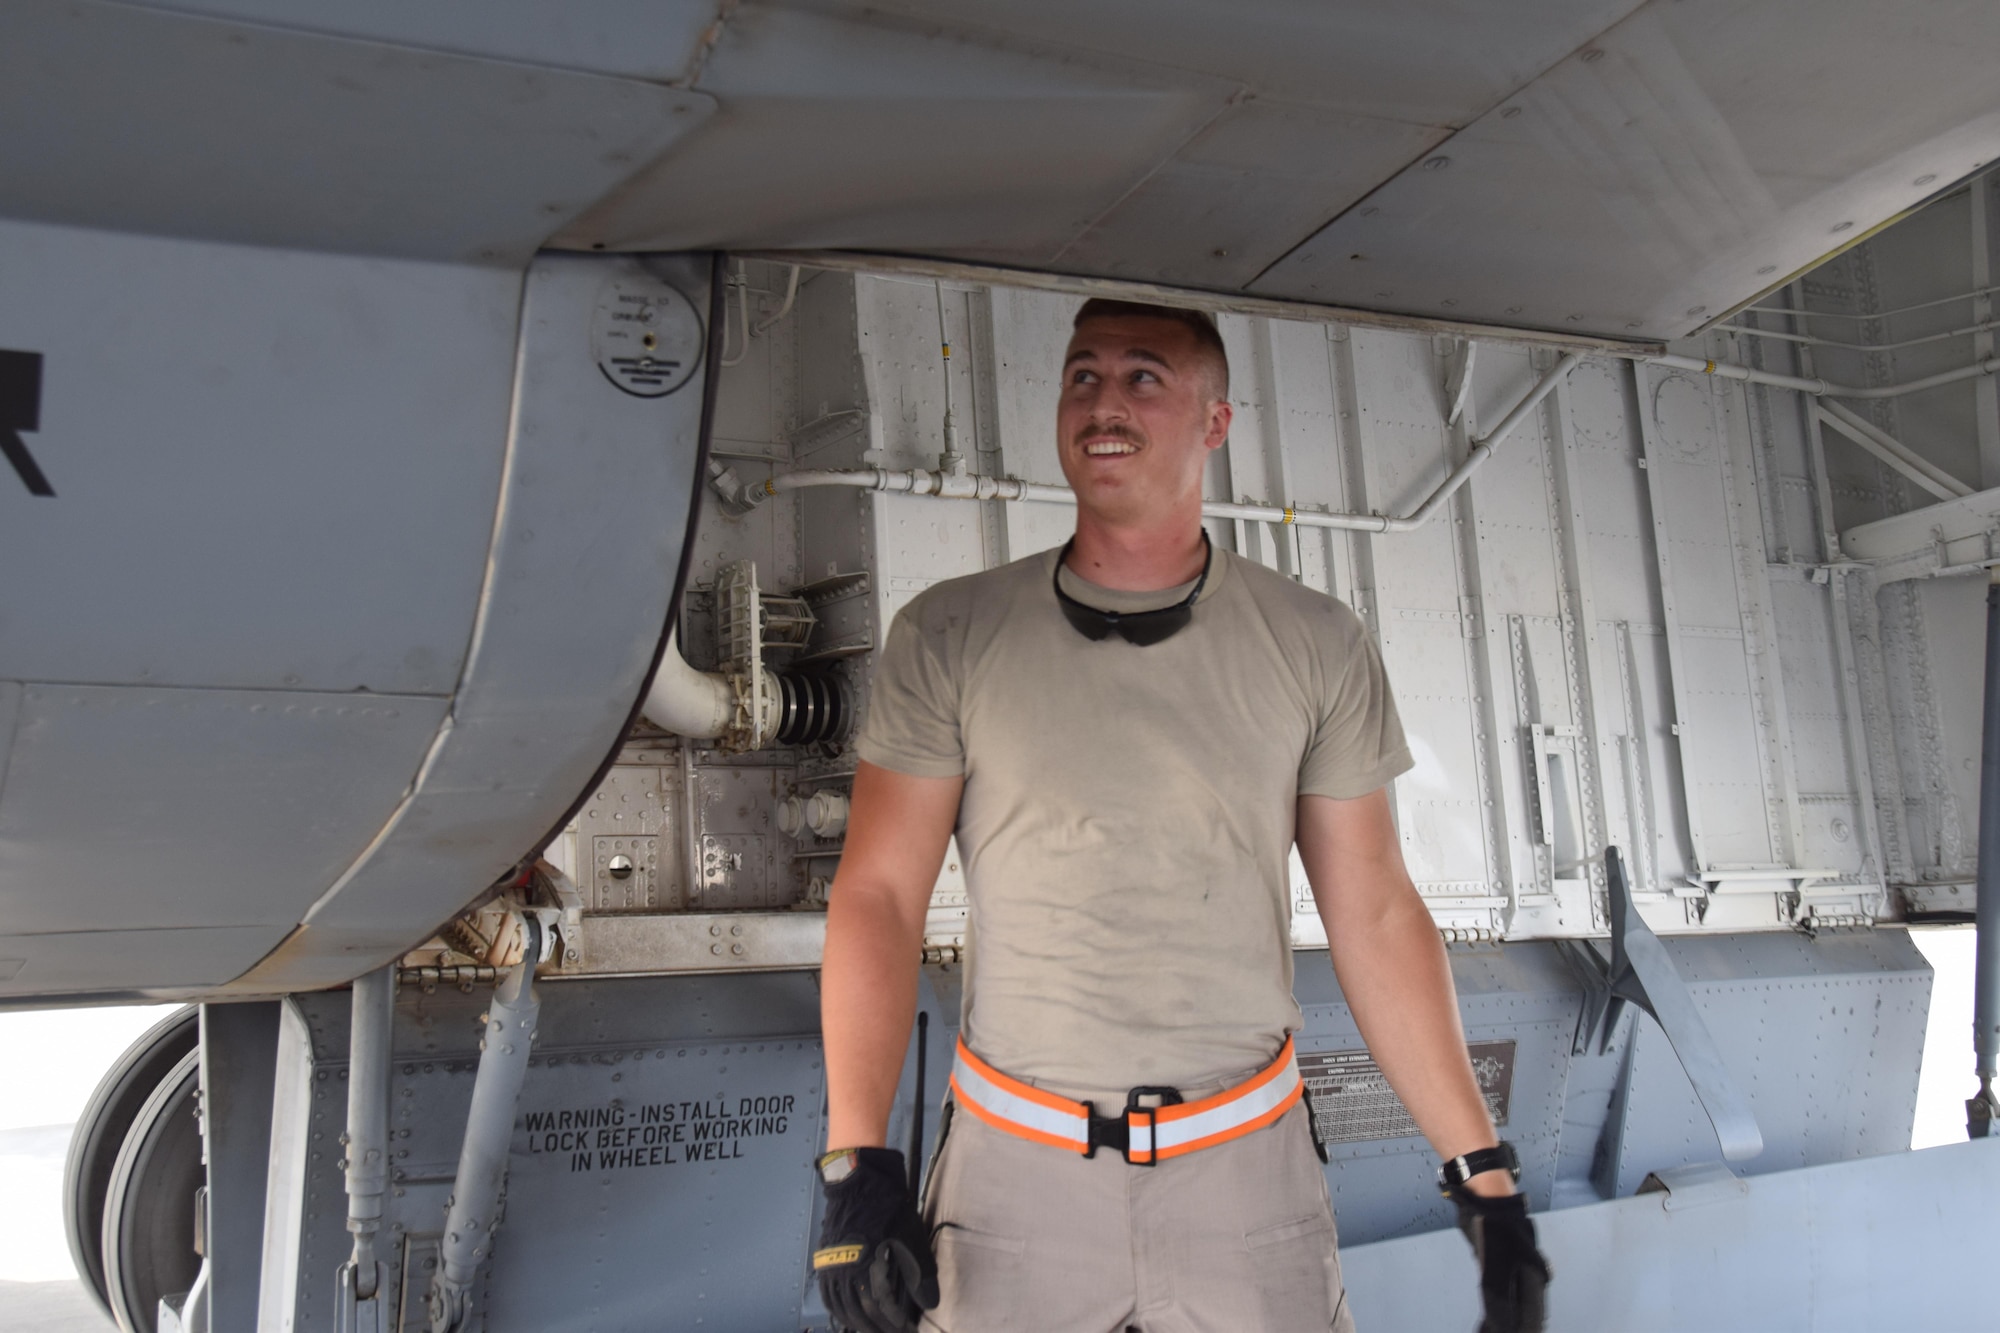 Staff Sgt. Ryan Feeney, 340th Expeditionary Aircraft Maintenance Unit crew chief, inspects the hydraulic system on a KC-135 Stratotanker June 1, 2016, at Al Udeid Air Base, Qatar. The hydraulic system on the KC-135 encompasses almost every system, to include landing gear, hydraulic steering, aircraft brakes and flight control. Feeney is attached to the 379th Air Expeditionary Wing and hails from Bangor Air National Guard Base, Maine. (U.S. Air Force photo by Technical Sgt. Carlos J. Trevino/Released)